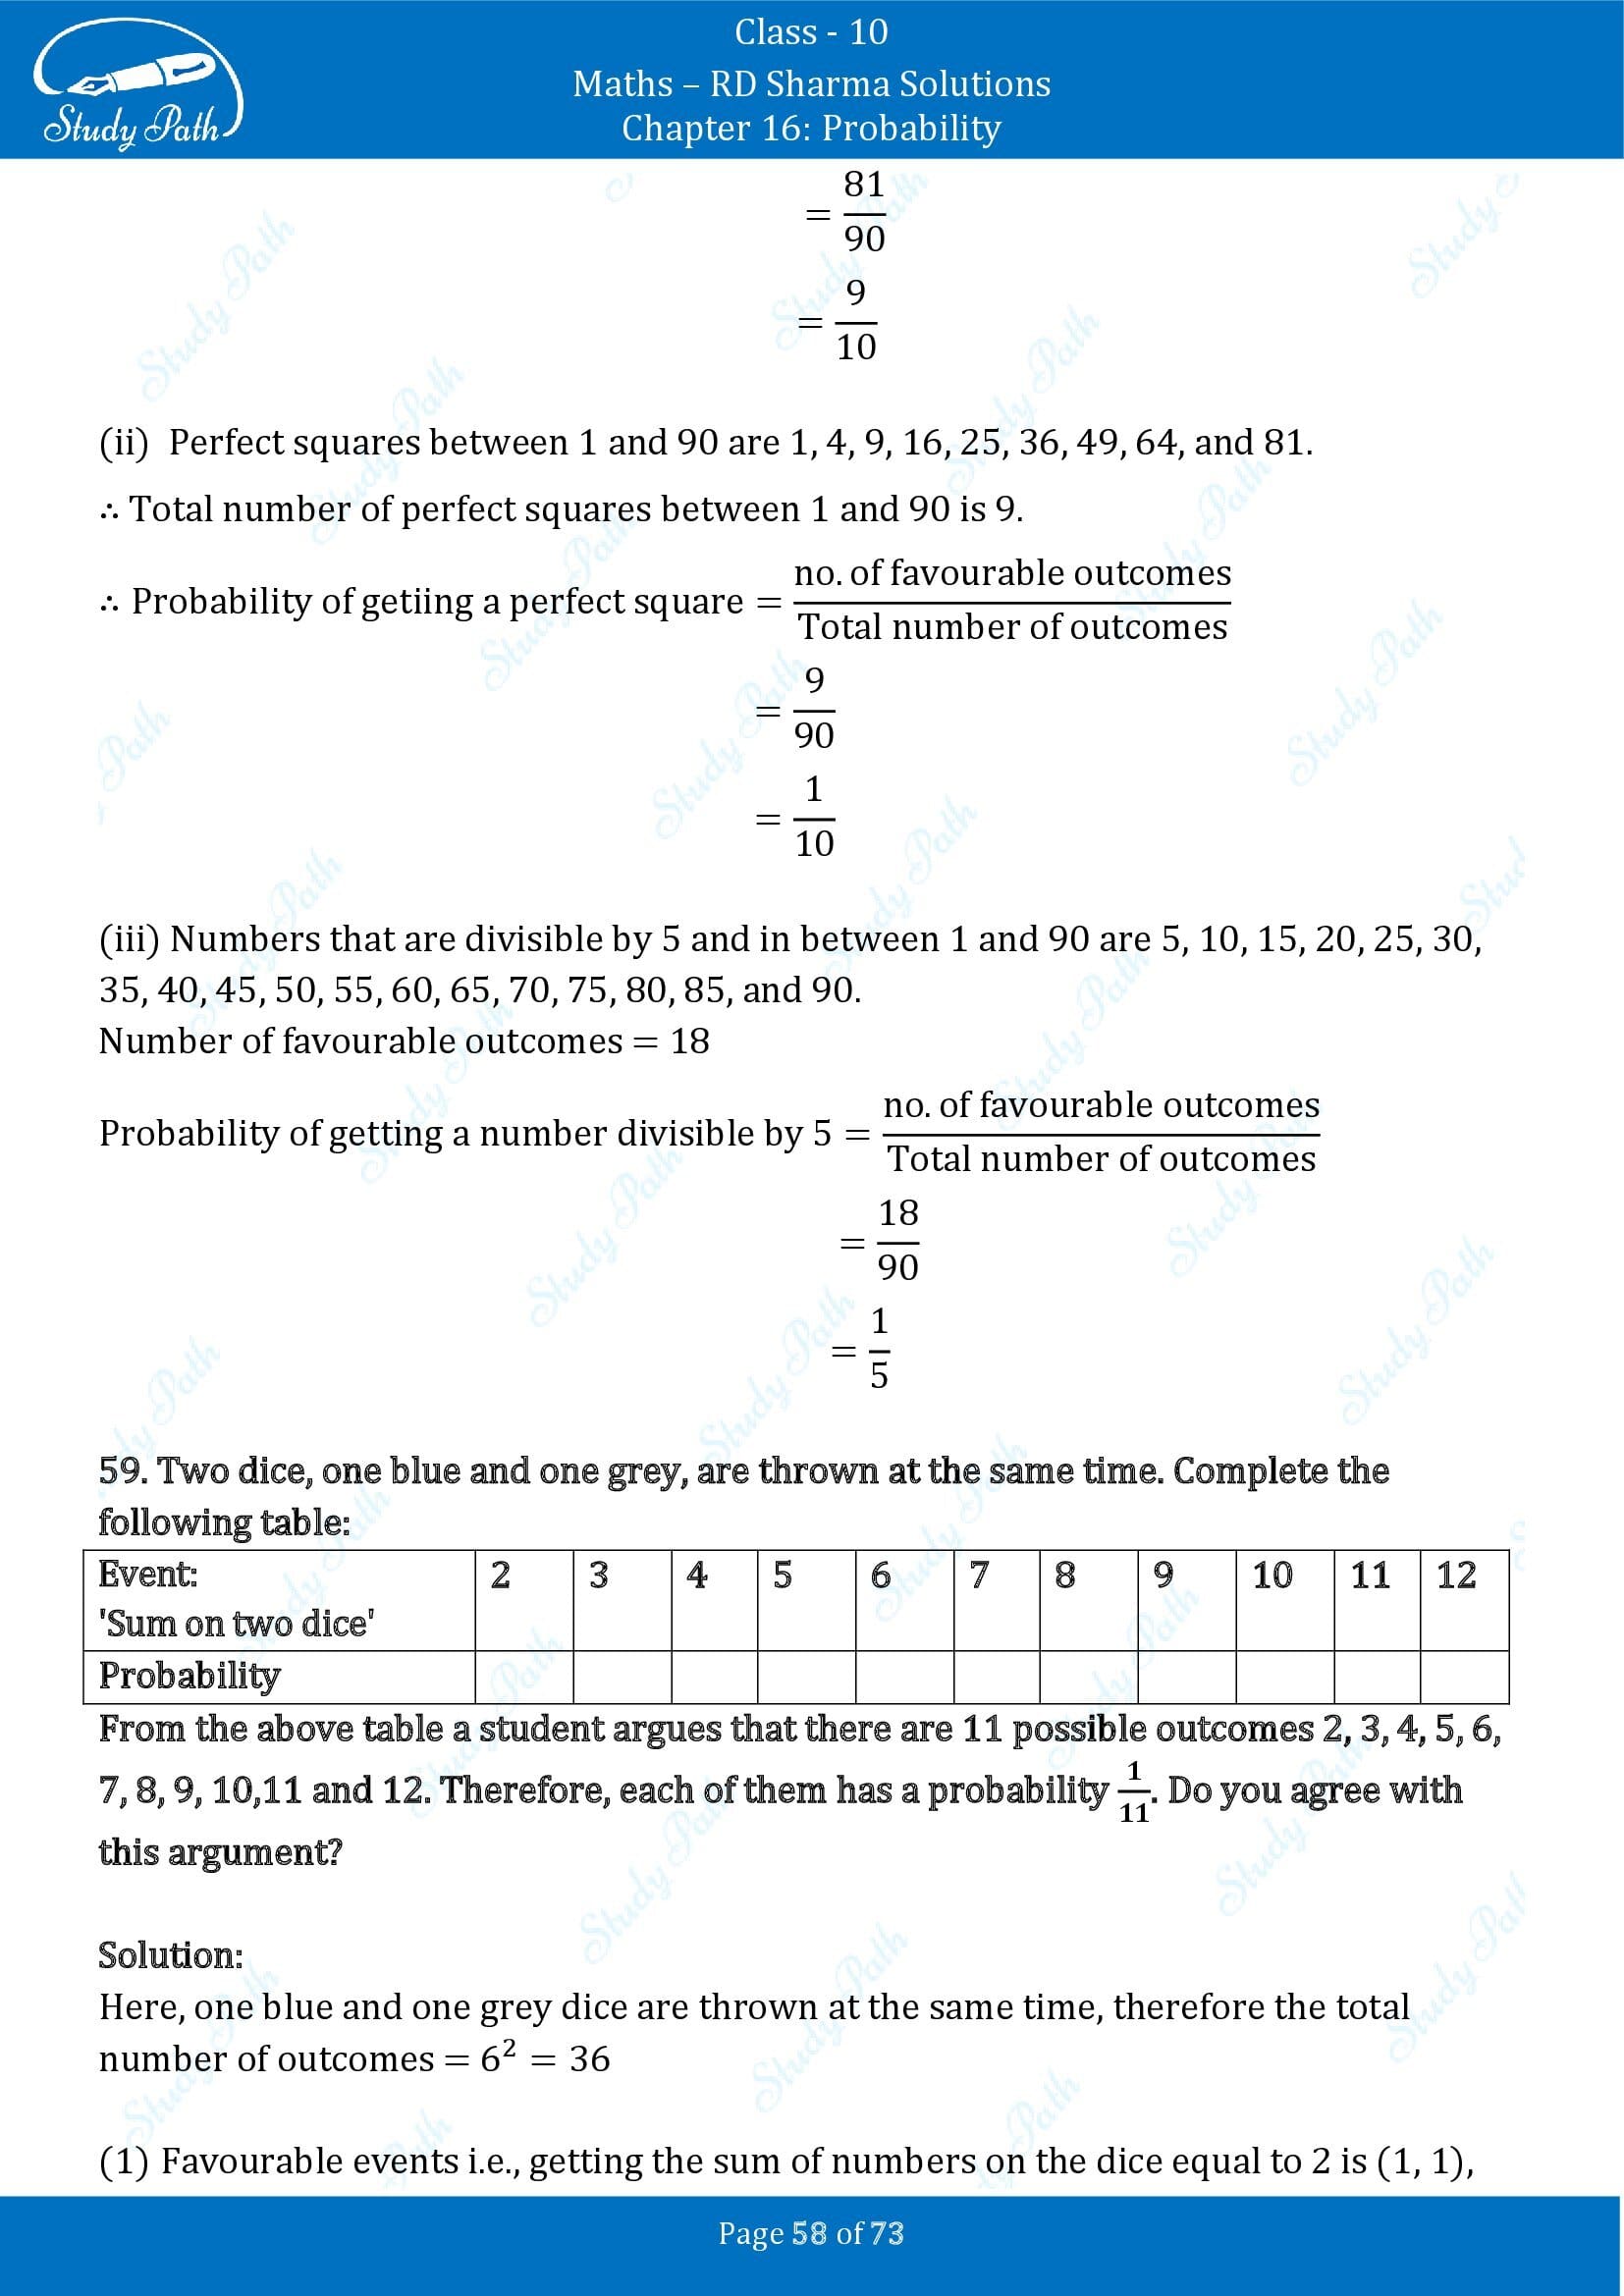 RD Sharma Solutions Class 10 Chapter 16 Probability Exercise 16.1 00058